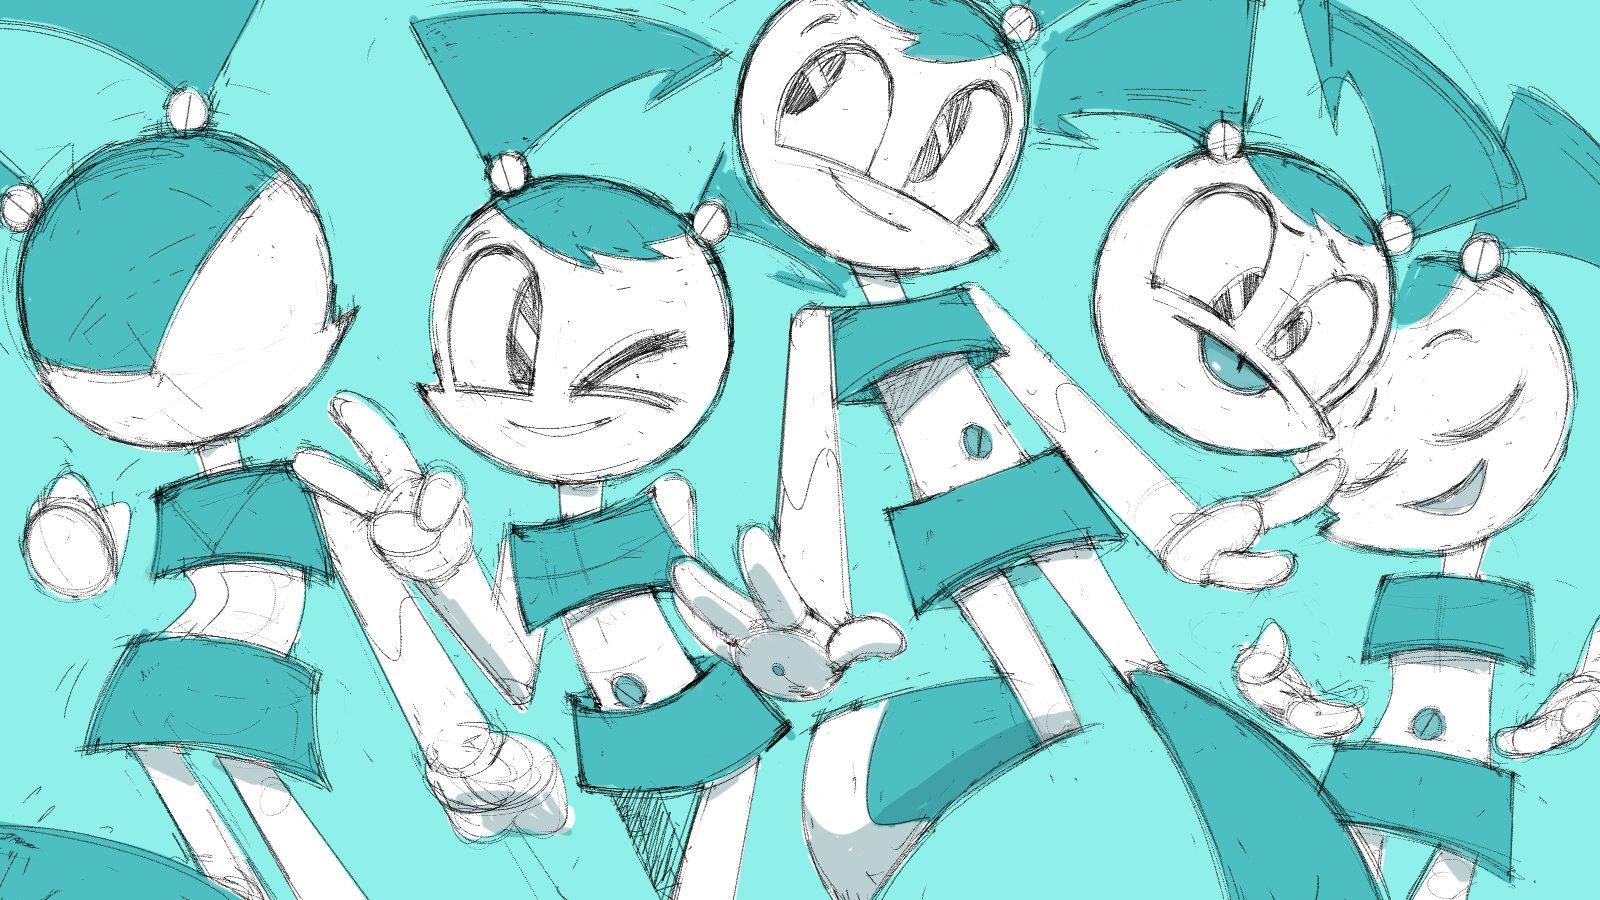 A Bloated National Defense Budget, TRILLIONS Of Tax Payer Dollars TWO DECADES With Nothing To Show For It To Produce A Robotic Global Response Unit Designated XJ 9 With